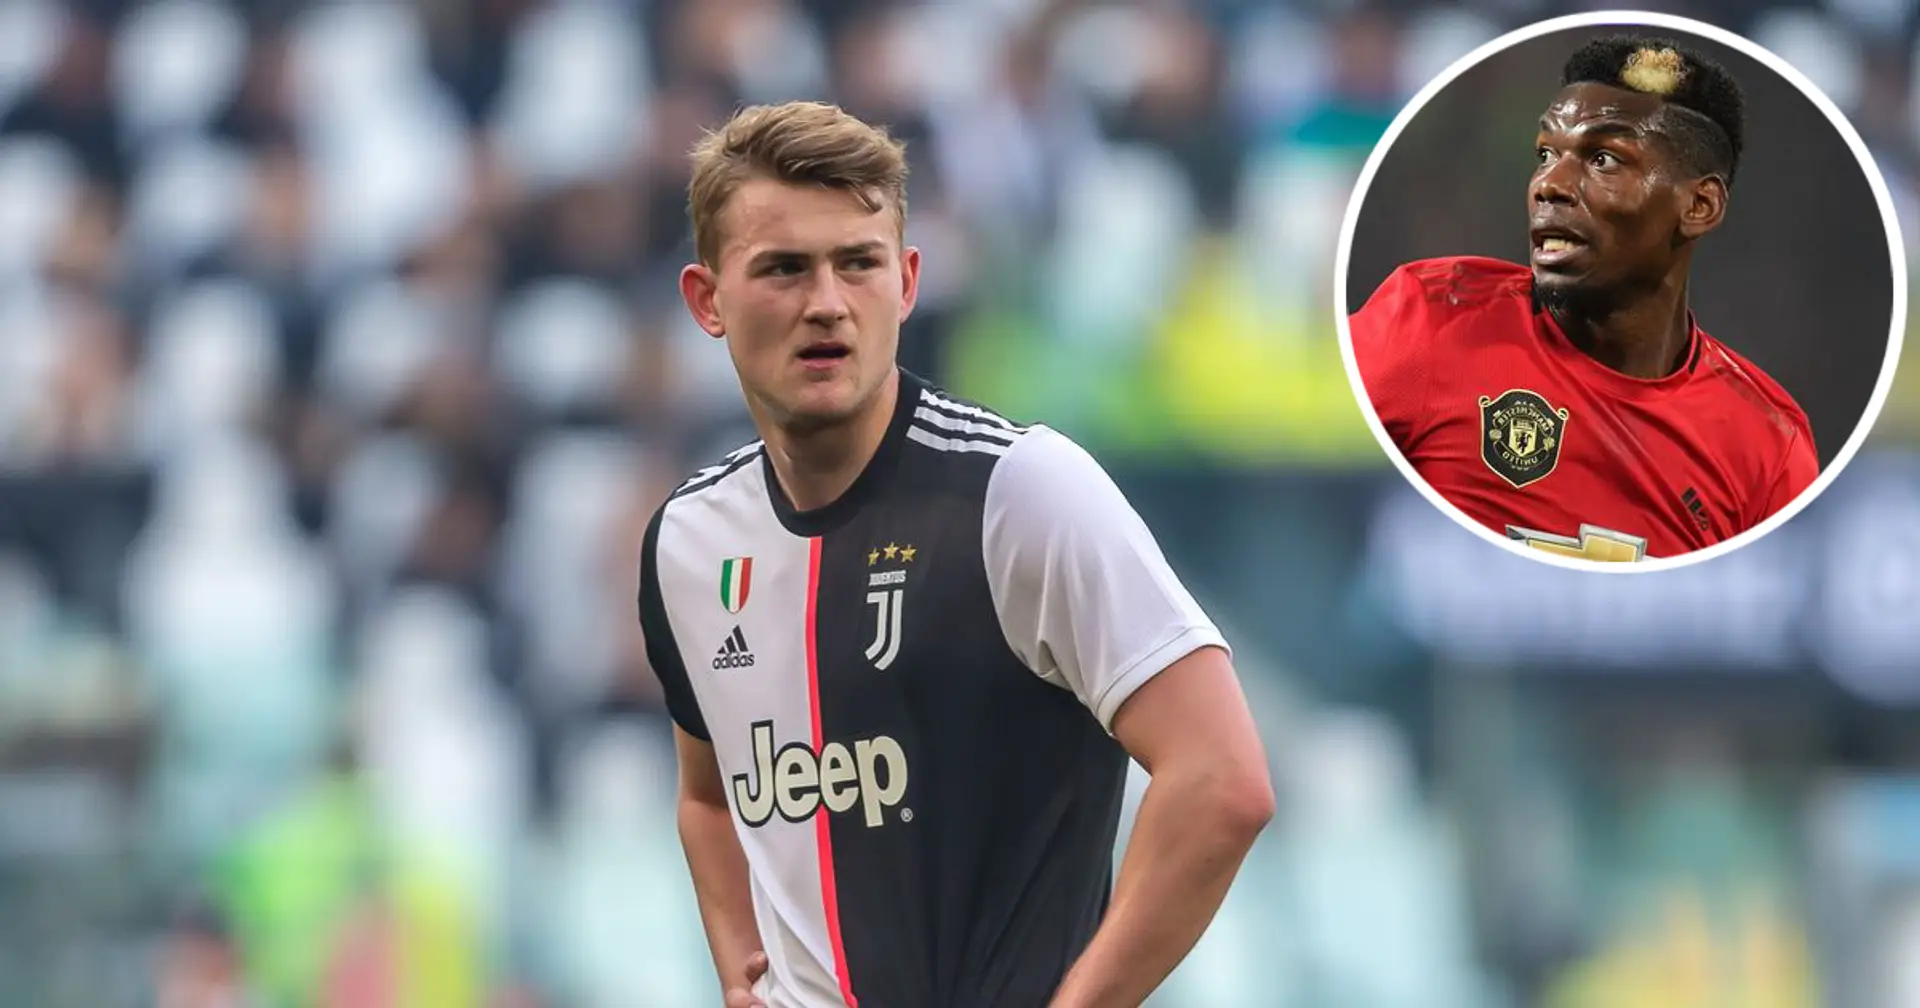 🗣 BIG TOPIC DISCUSSION: Would you support the rumoured Paul Pogba-Matthijs de Ligt swap deal?